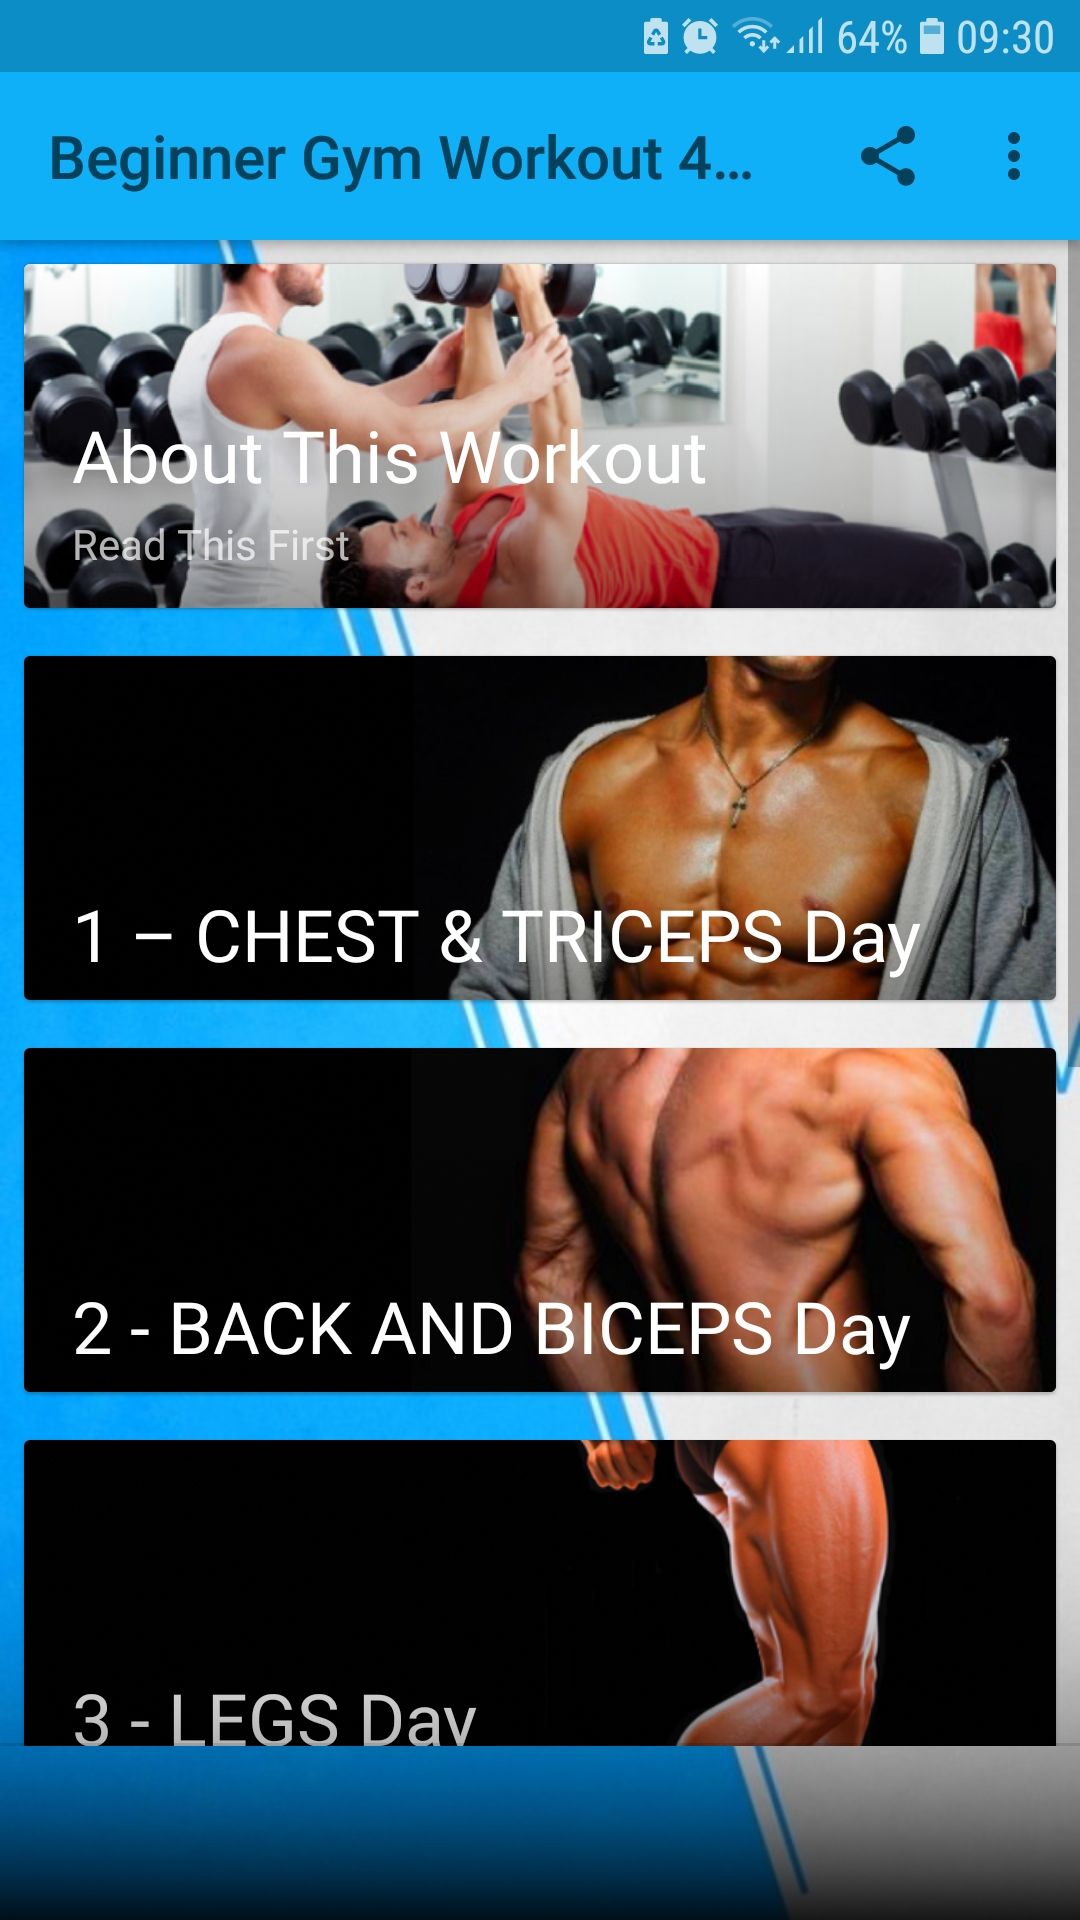 Beginners Gym Workout mobile fitness app